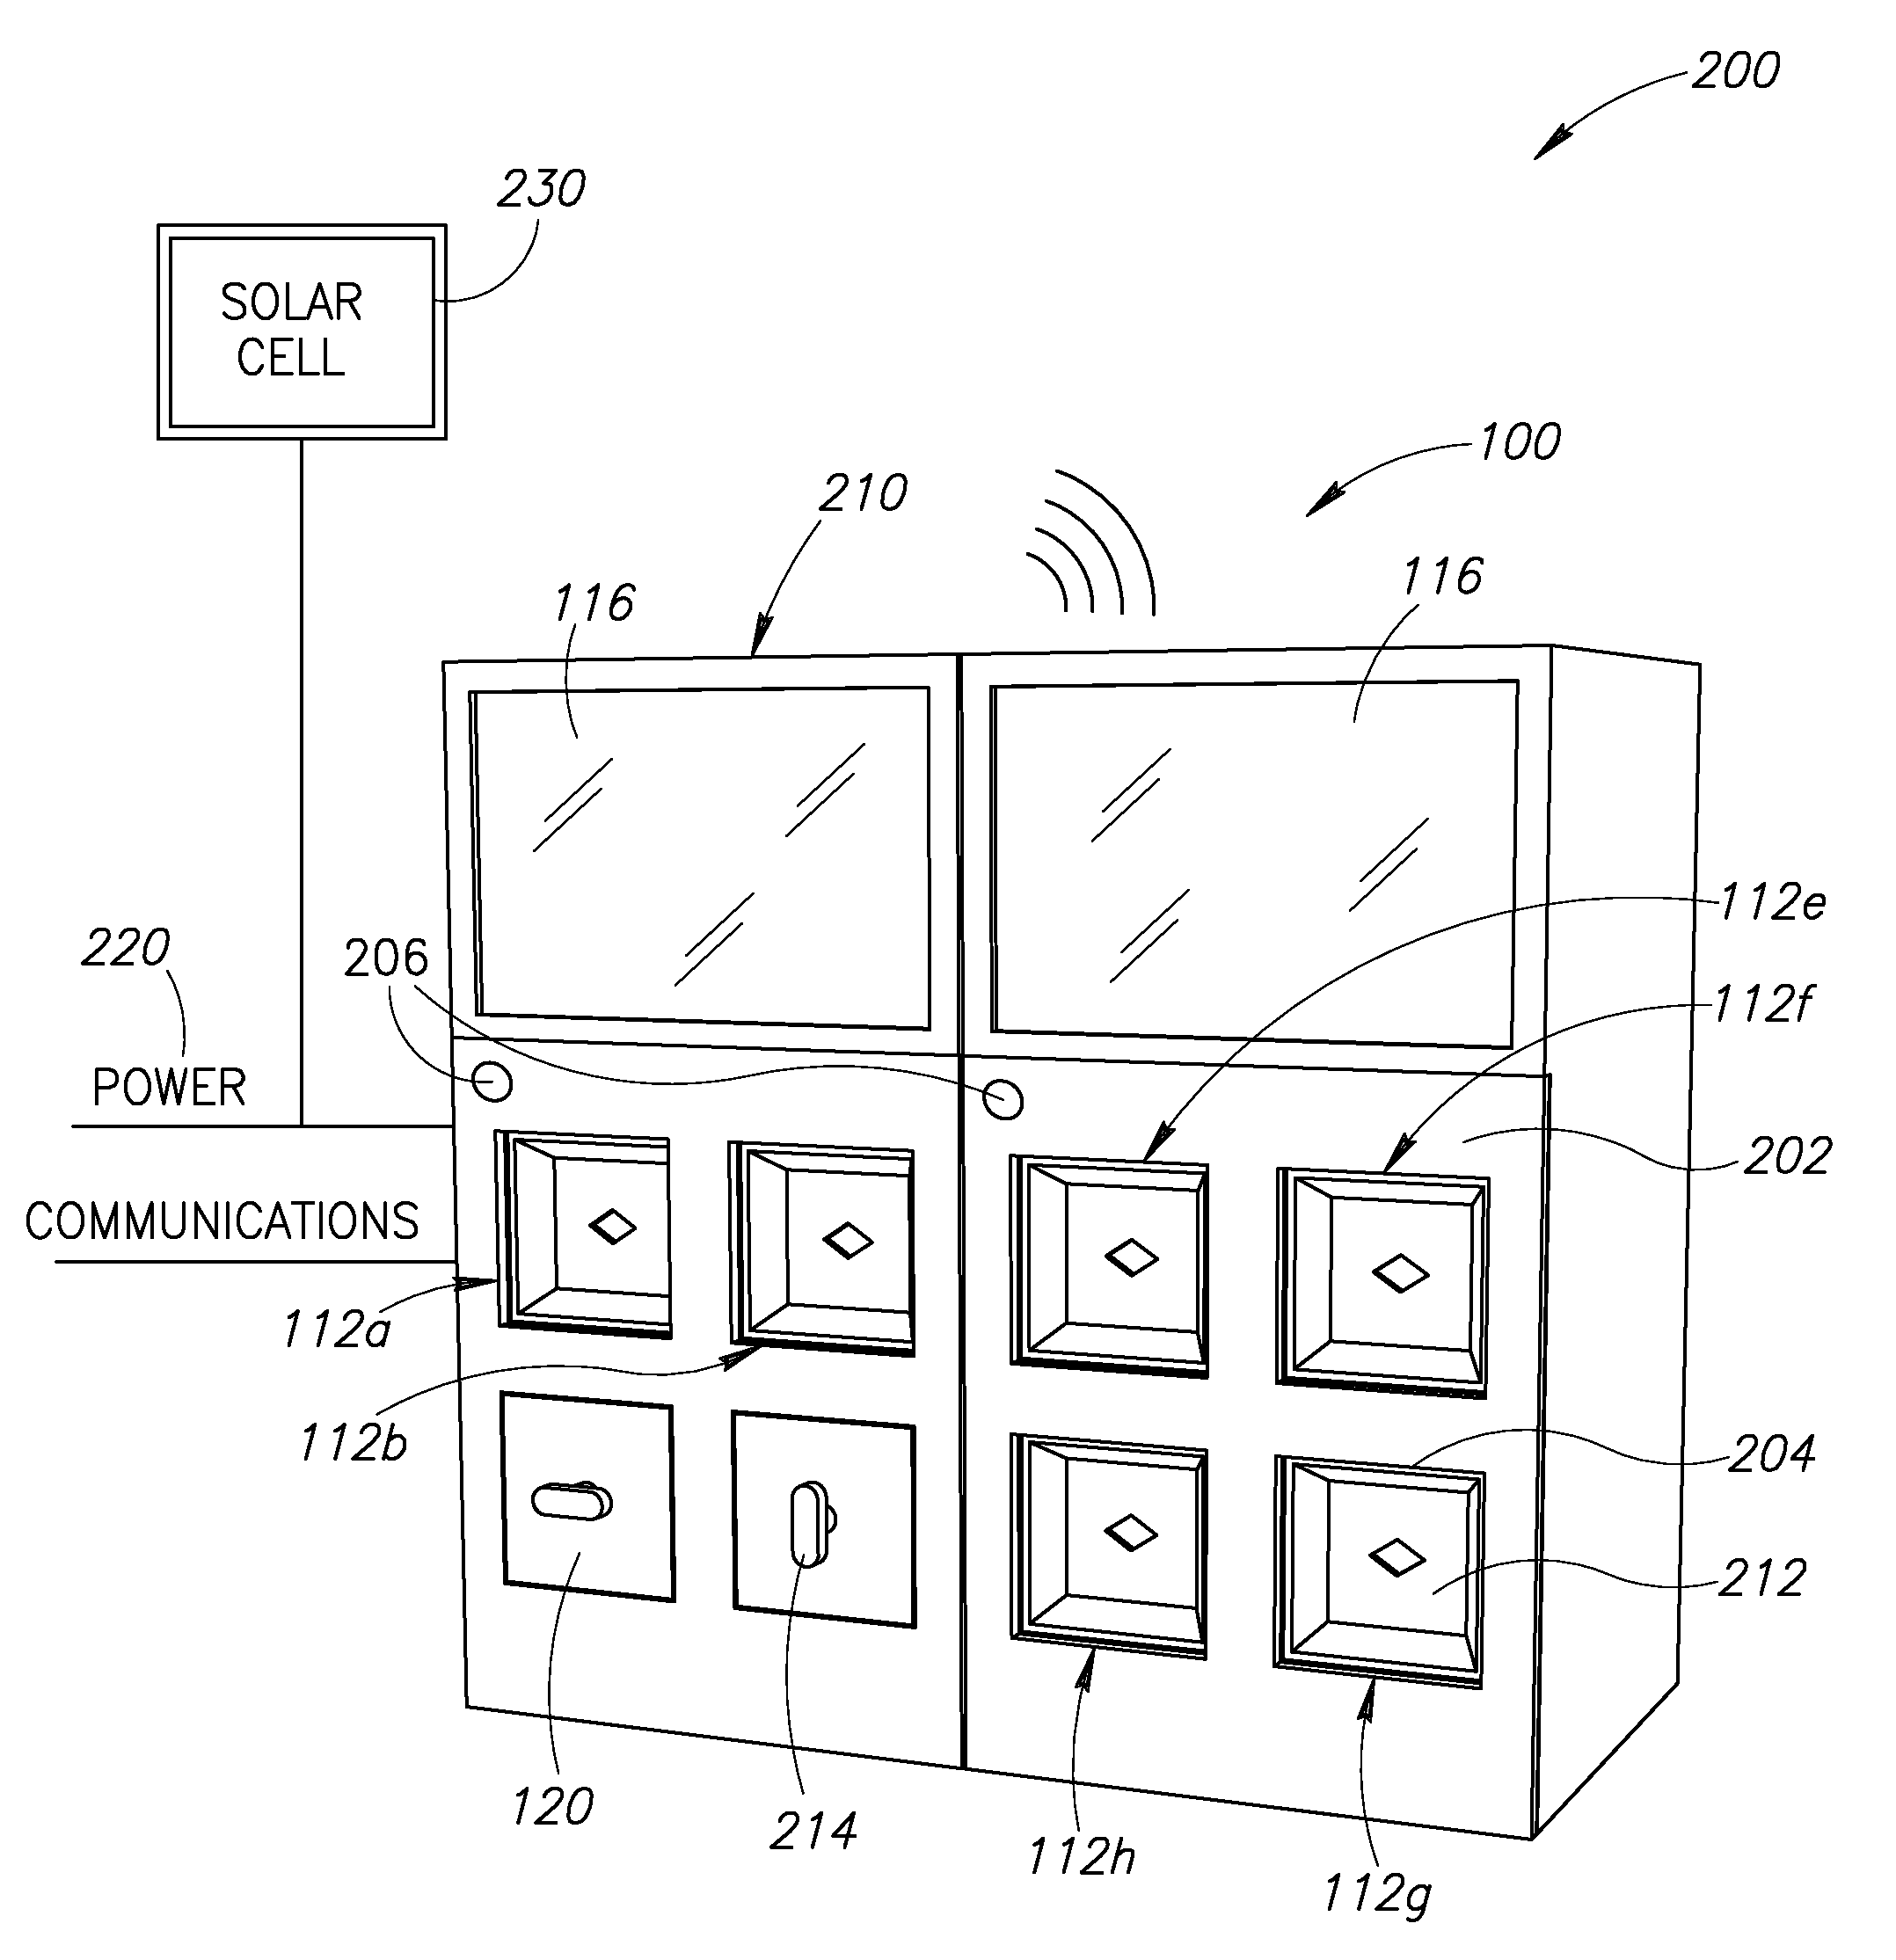 Apparatus, system, and method for vending, charging, and two-way distribution of electrical energy storage devices